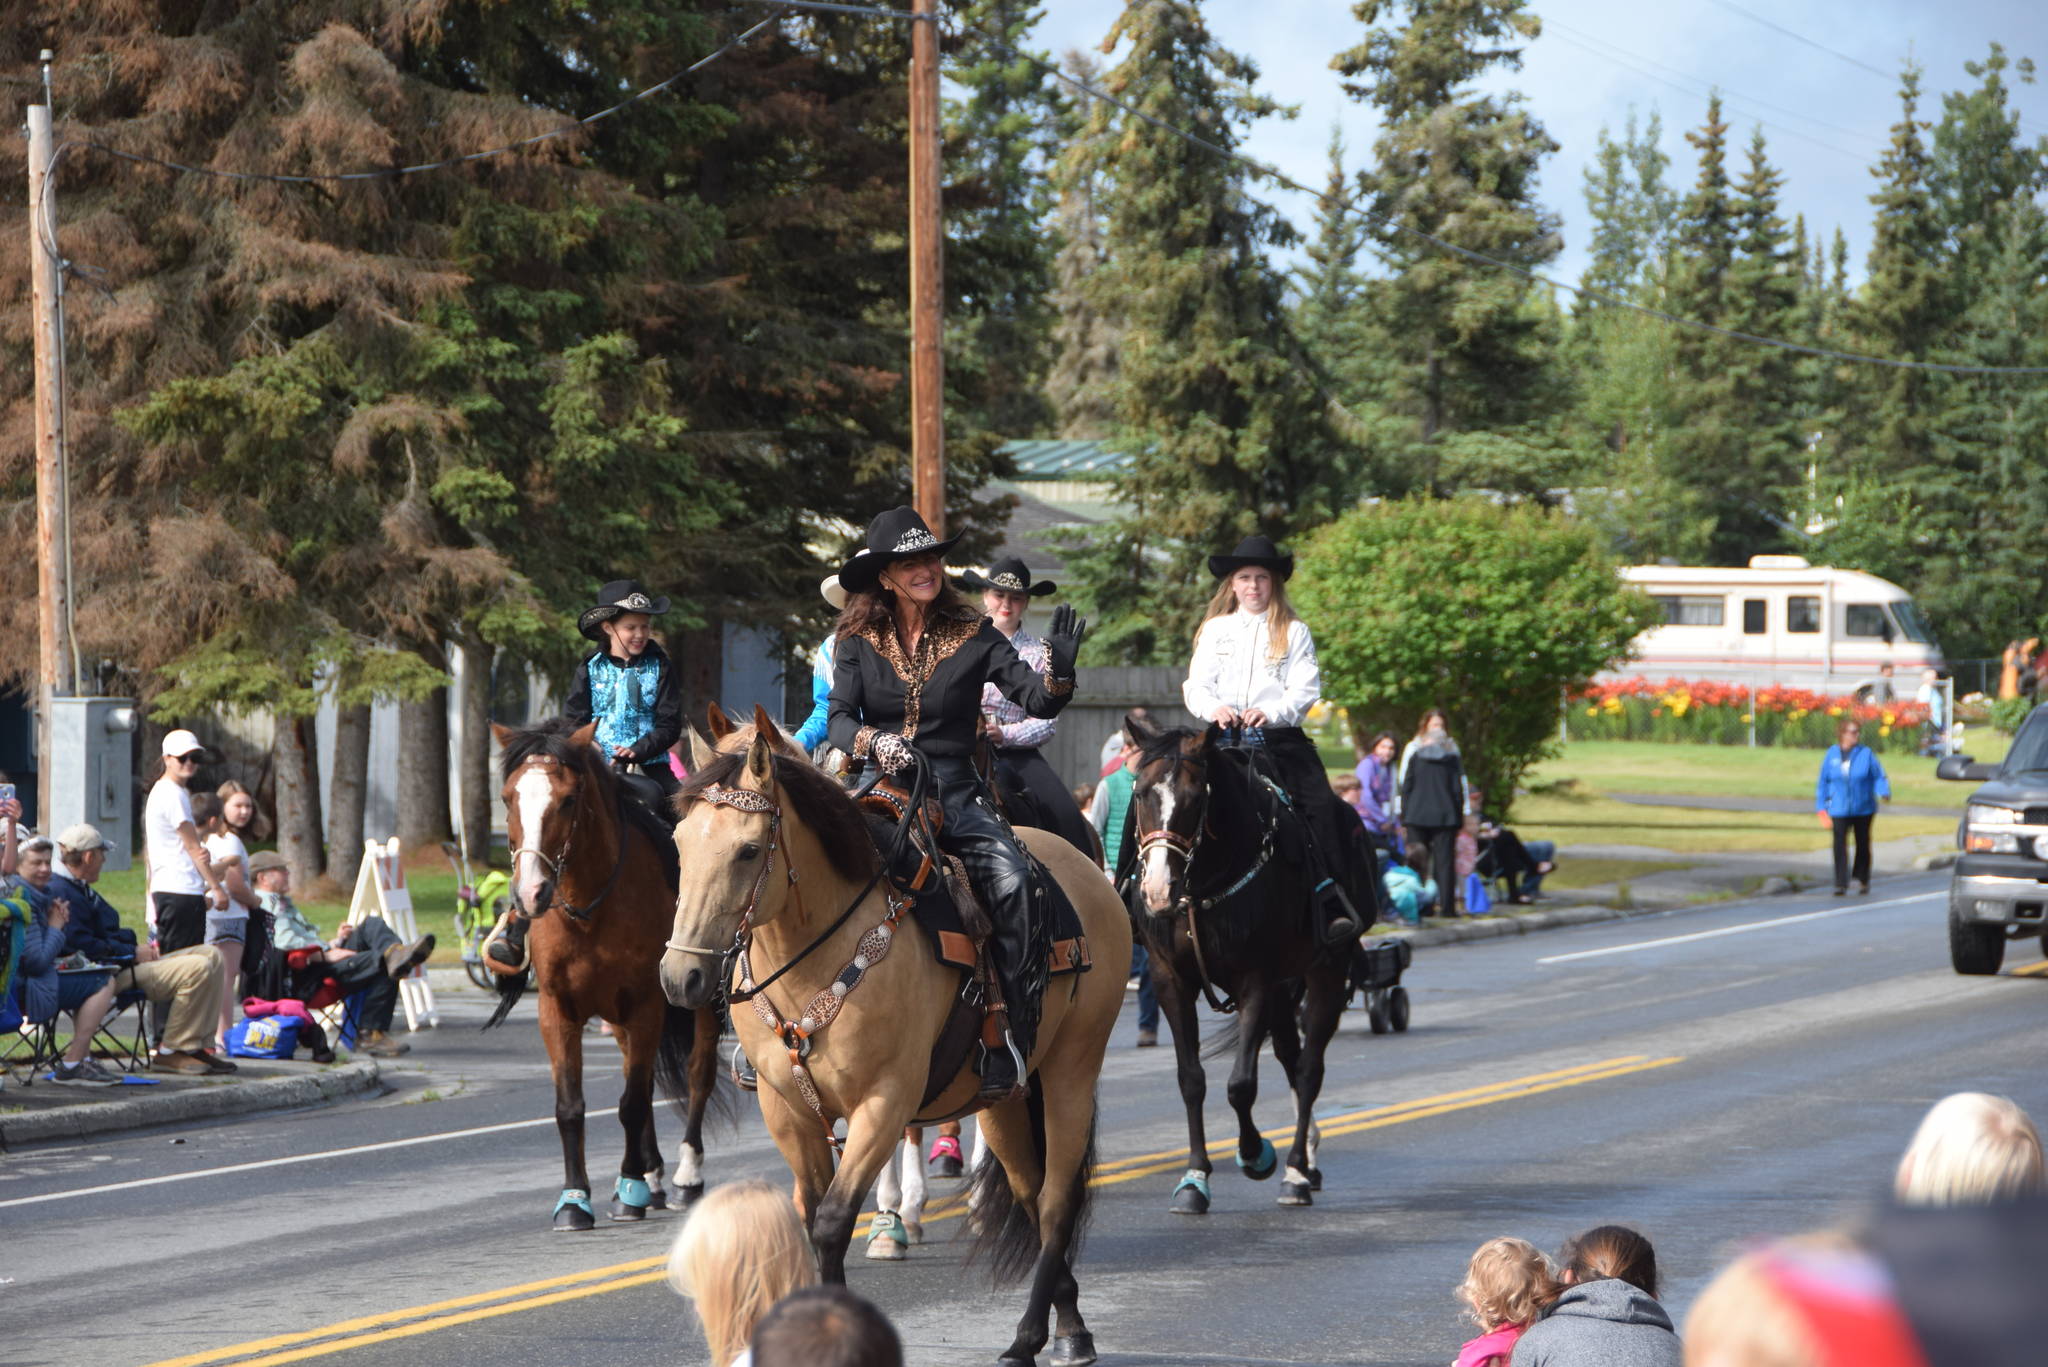 Volunteers from the Soldotna Equestrian Association wave to the crowd during Soldotna’s Progress Day Parade in Soldotna, Alaska on July 27, 2019. (Photo by Brian Mazurek/Peninsula Clarion)